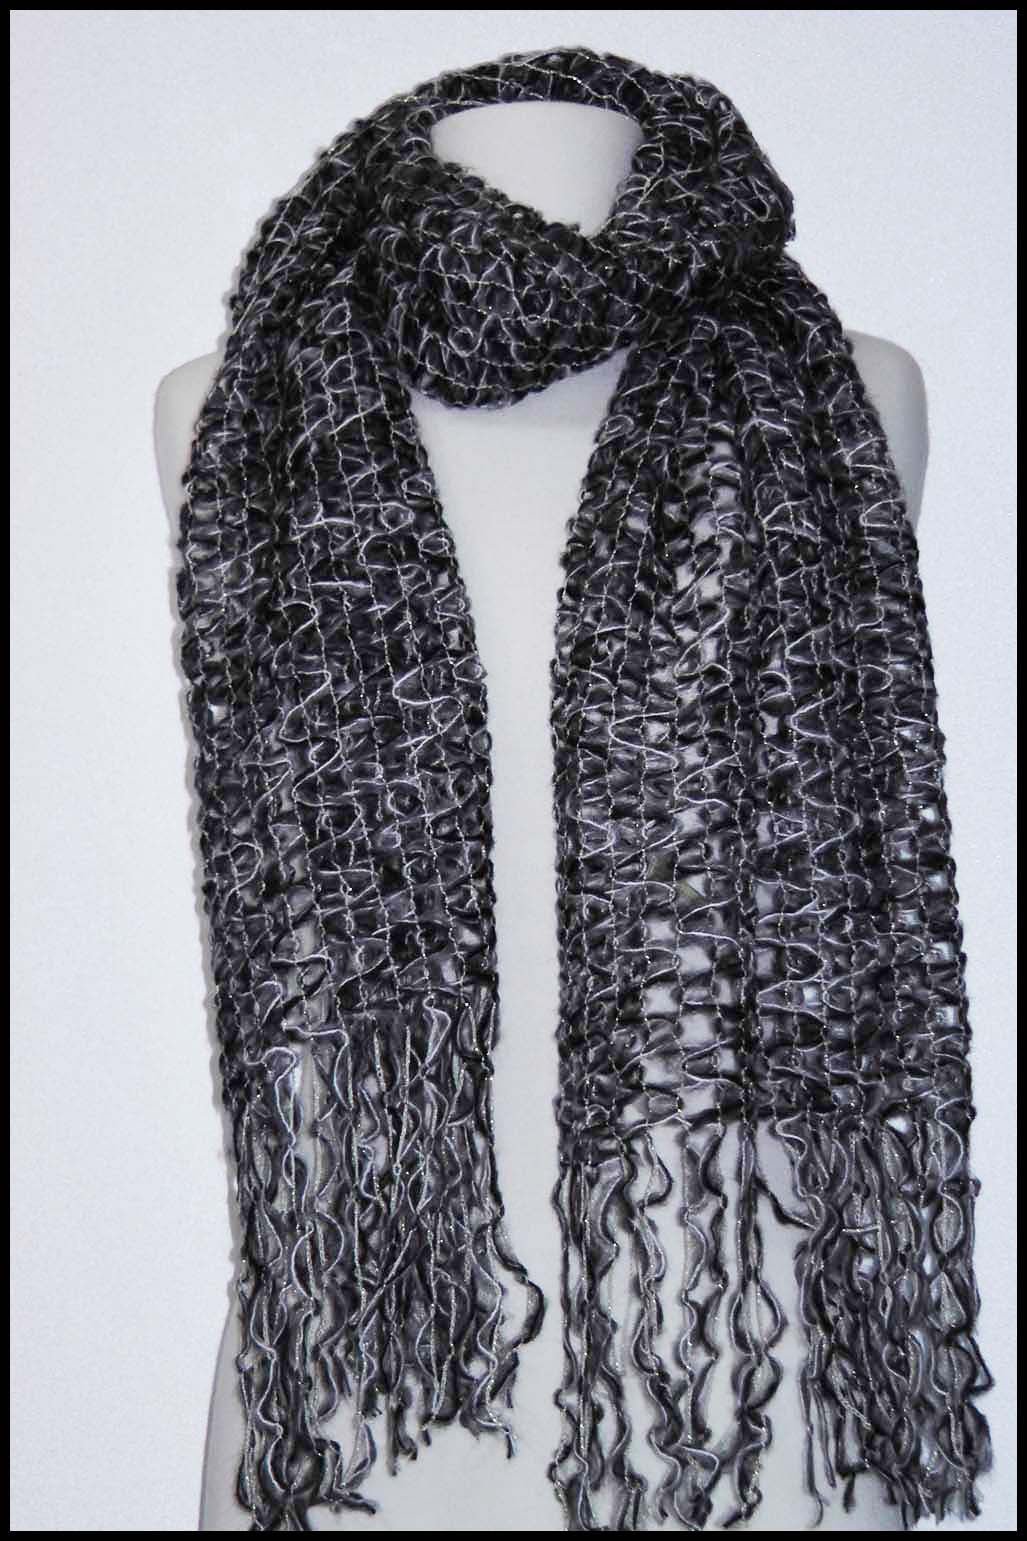 Loosely Knit Scarf with Metallic Threads and Fringed Ends